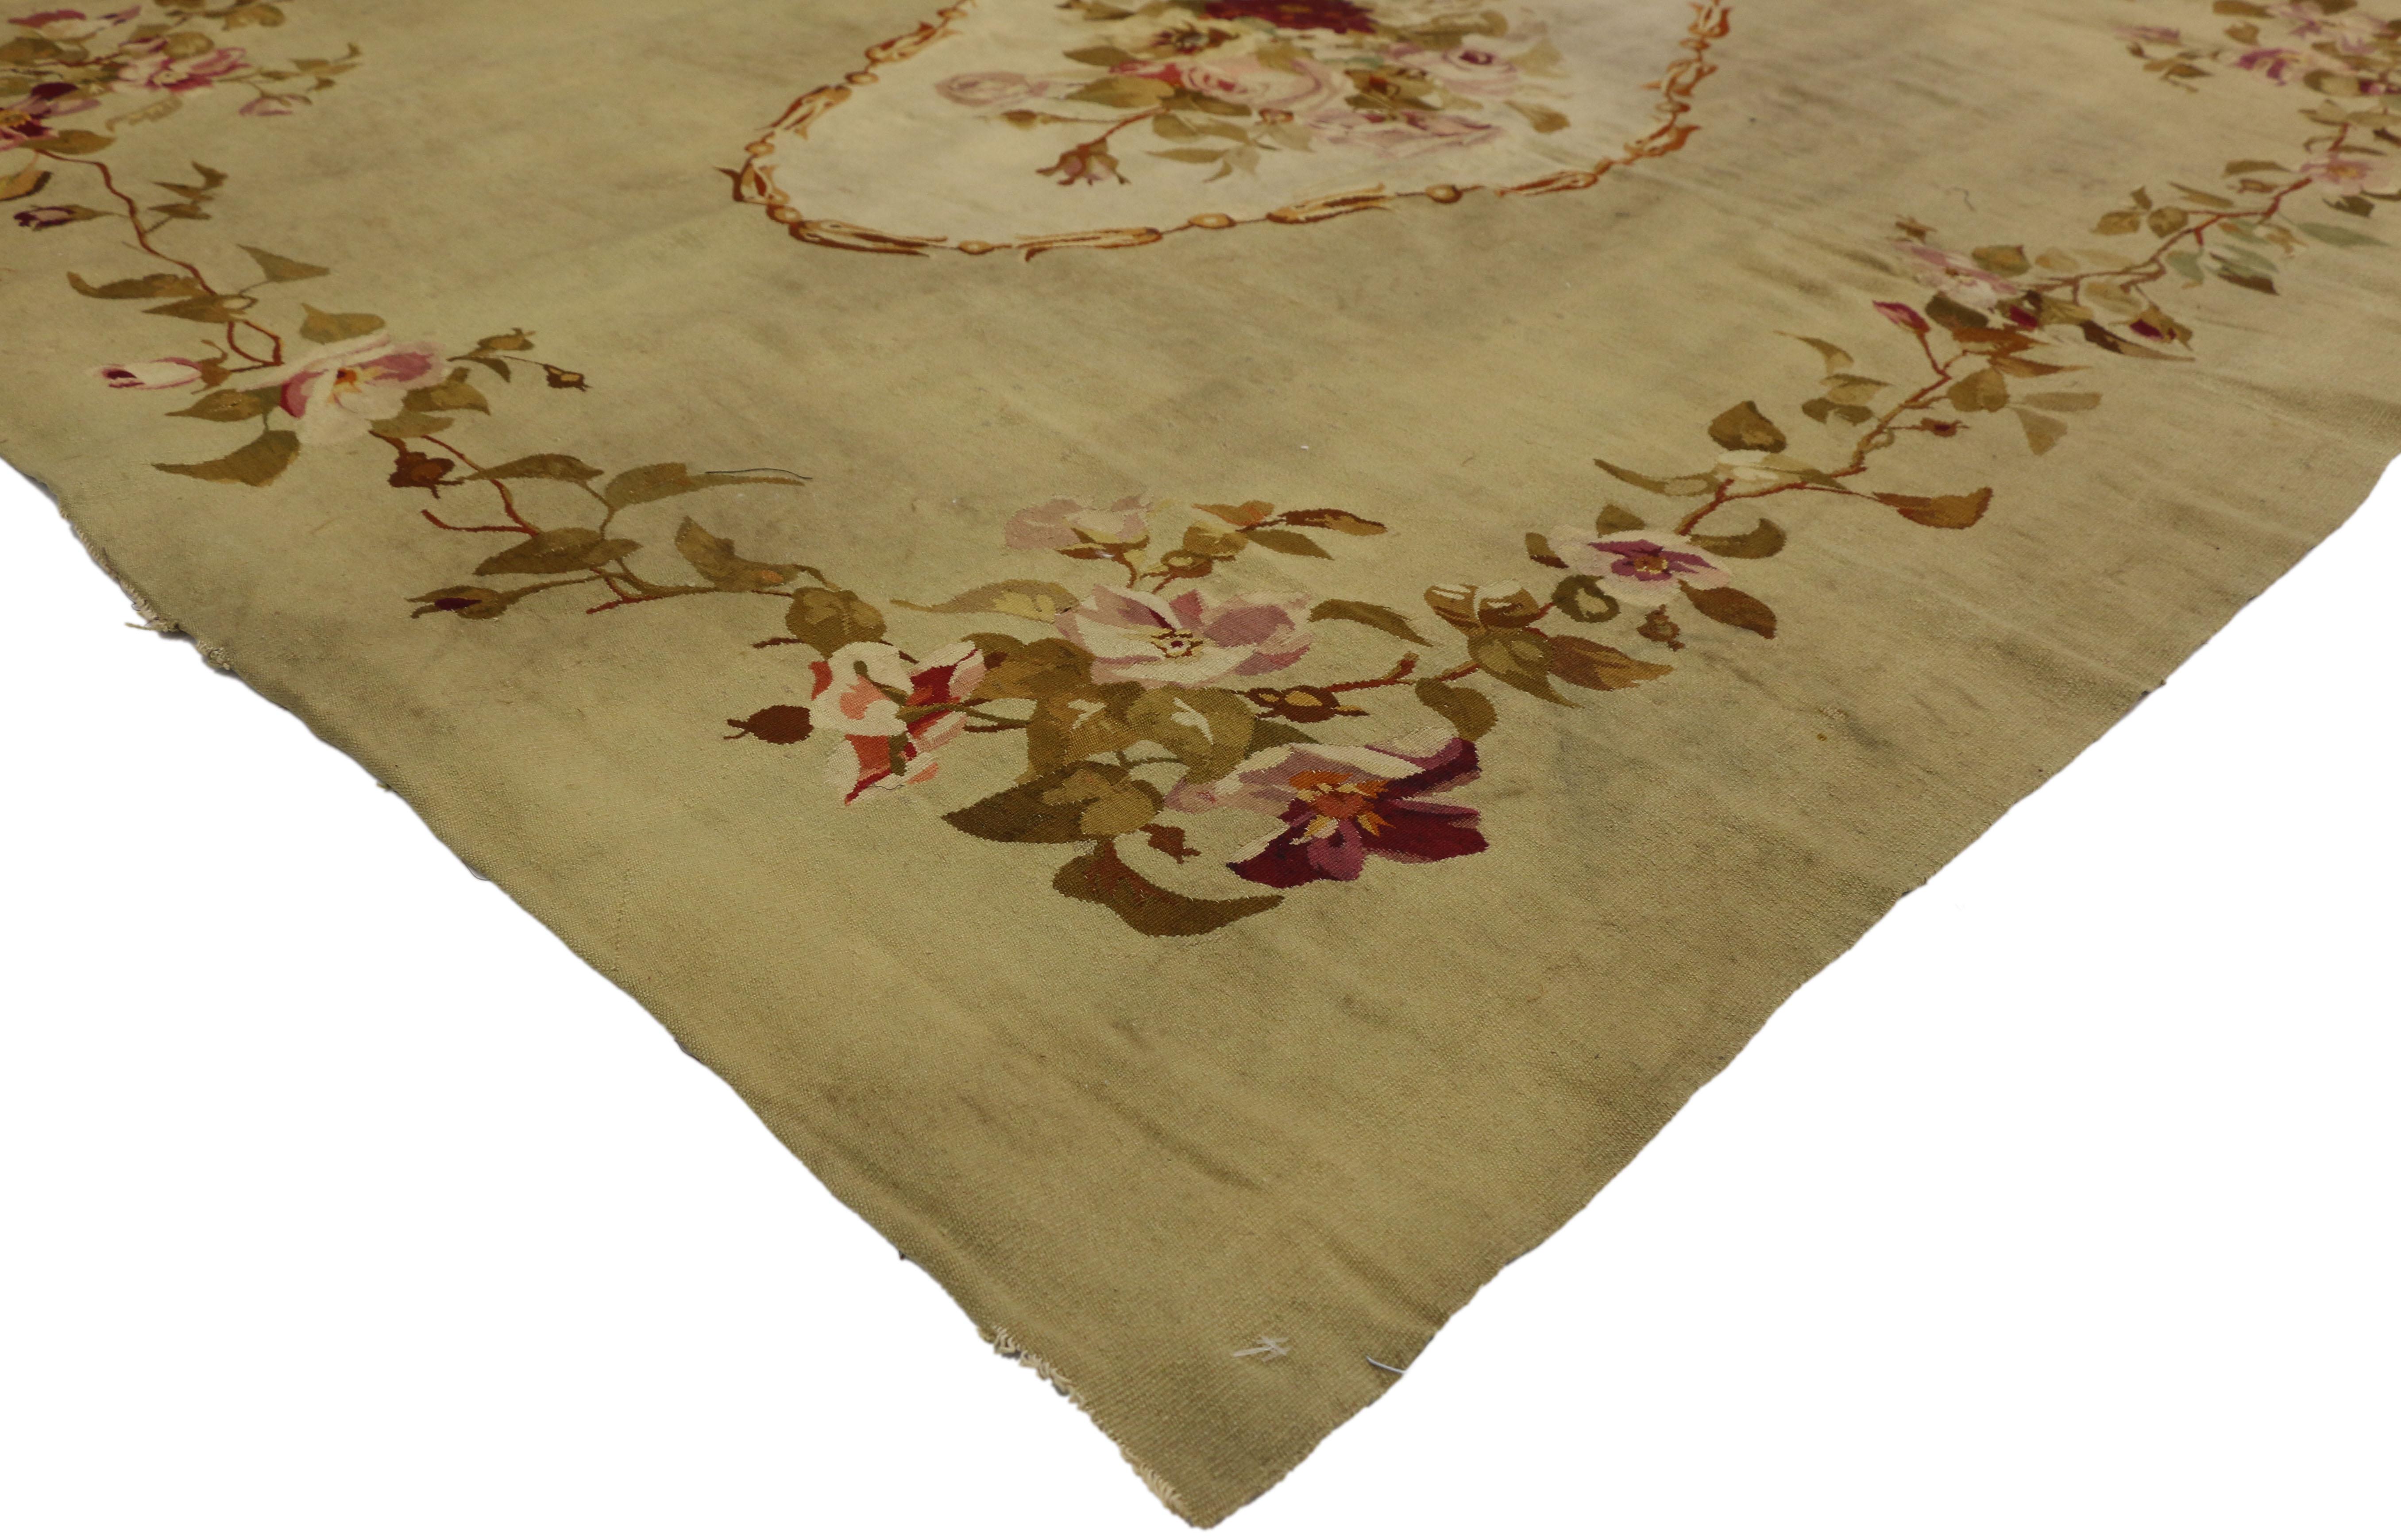 72862 Late 19th Century Antique French Aubusson Rug with Chintz Renaissance Style 05'06 x 06'03. Drawing inspiration from Mario Buatta and Chintz style, this handwoven wool mid-19th century antique French Aubusson rug beautifully embodies French